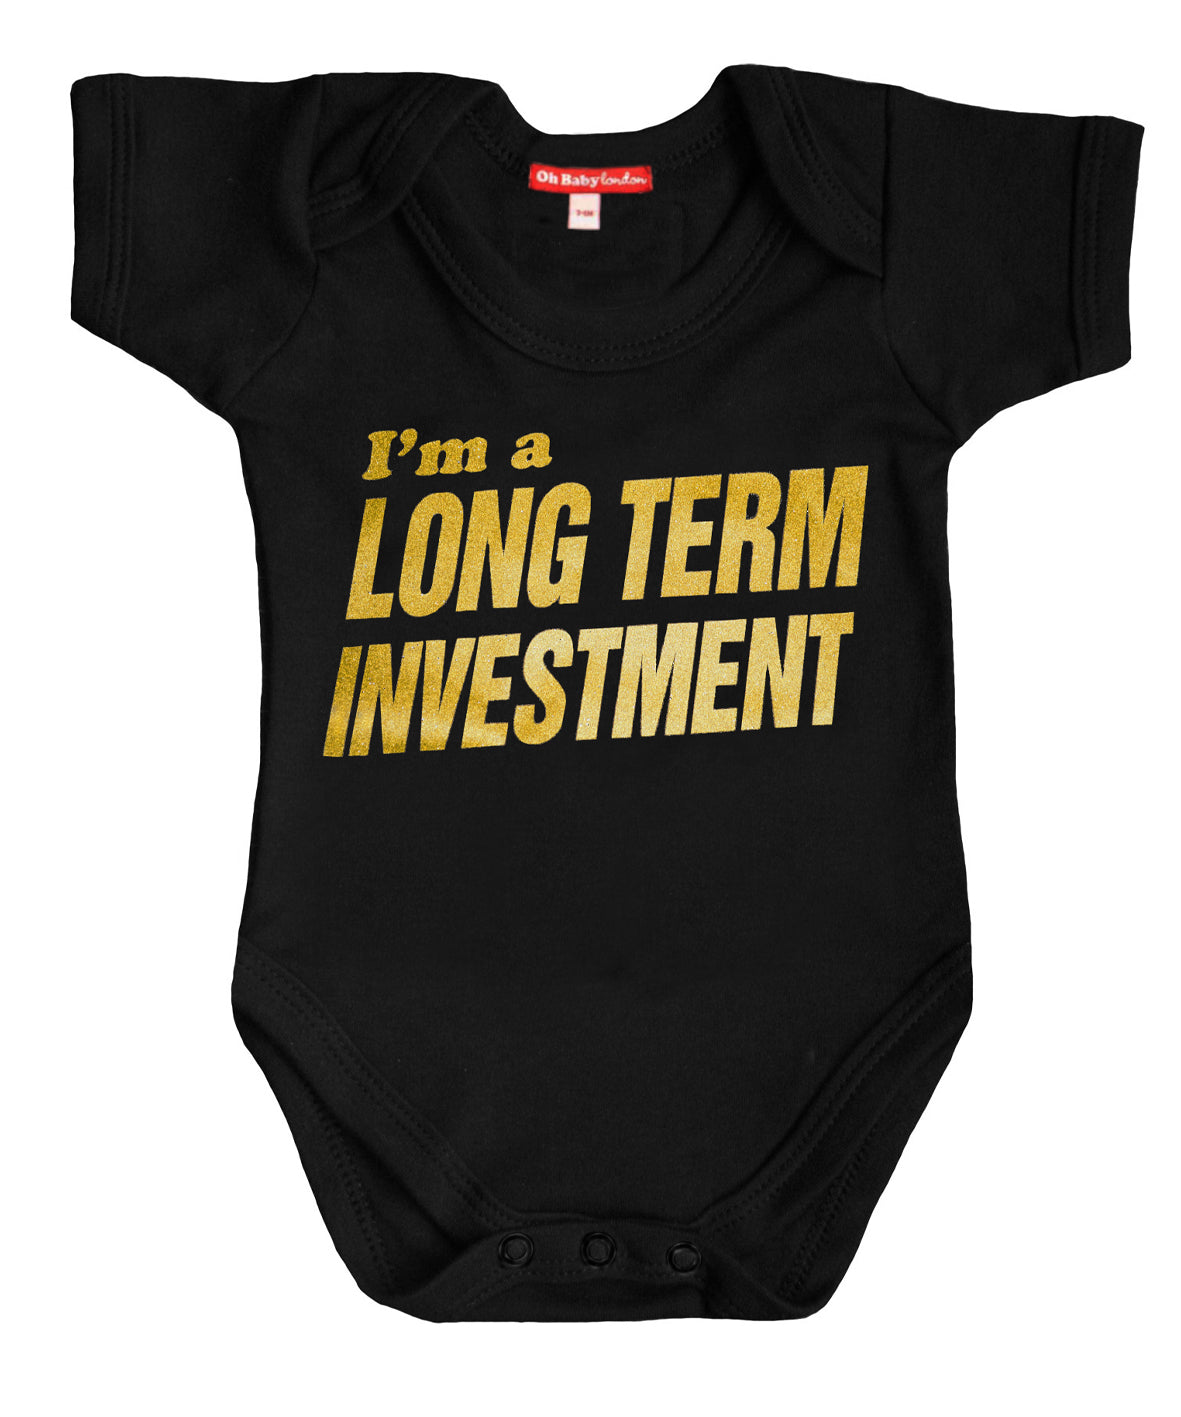 I'M A LONG TERM INVESTMENT - BODY